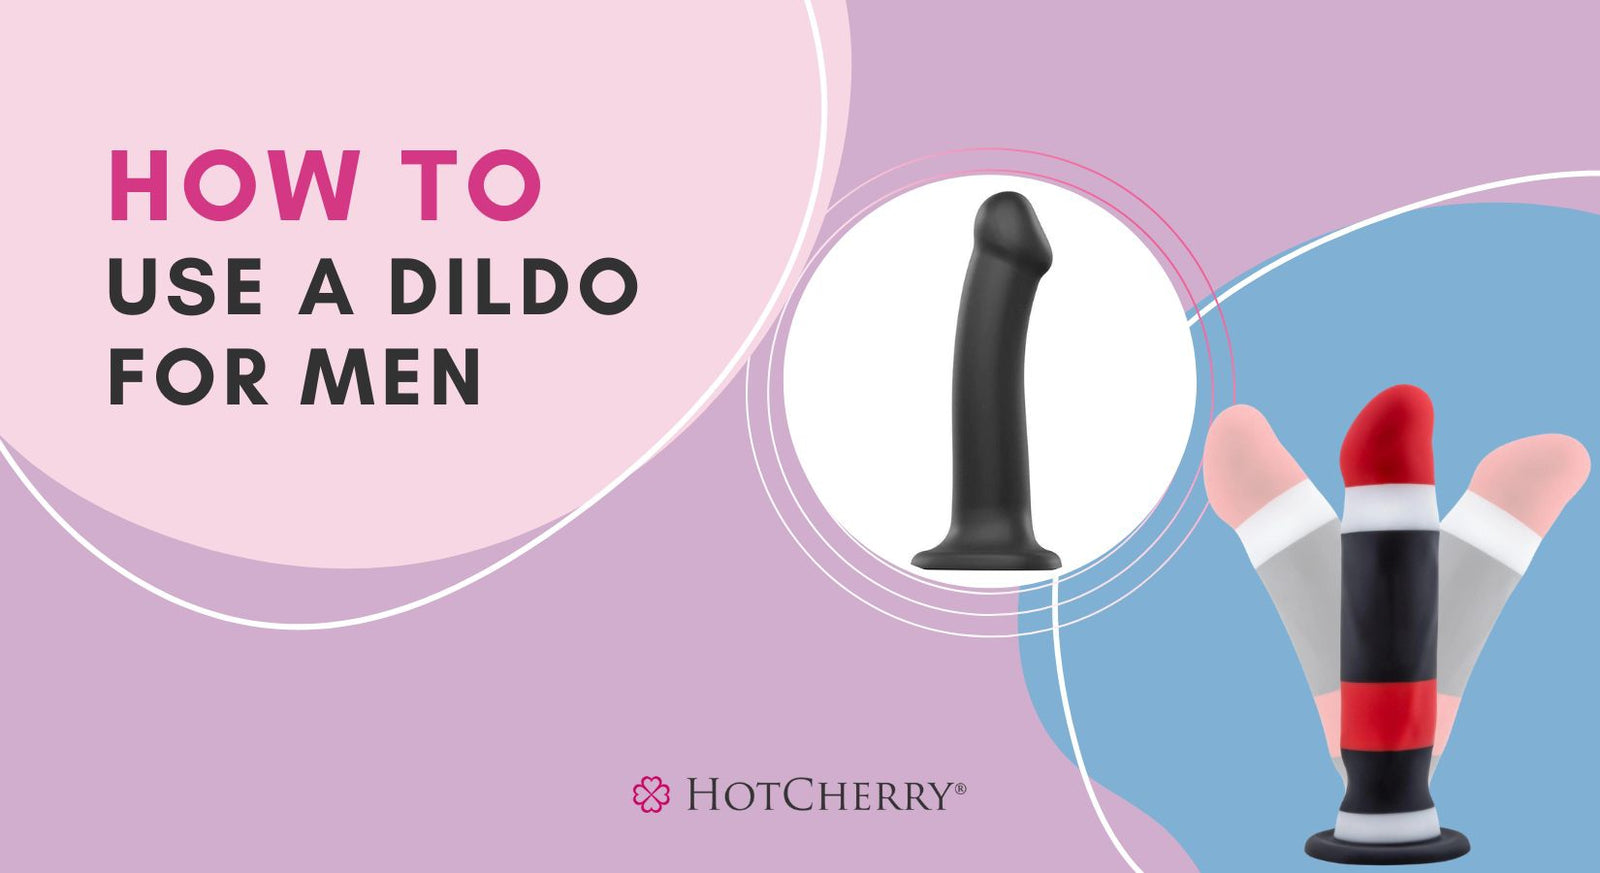 How to Use a Dildo for Men: Guide to Male Anal Play